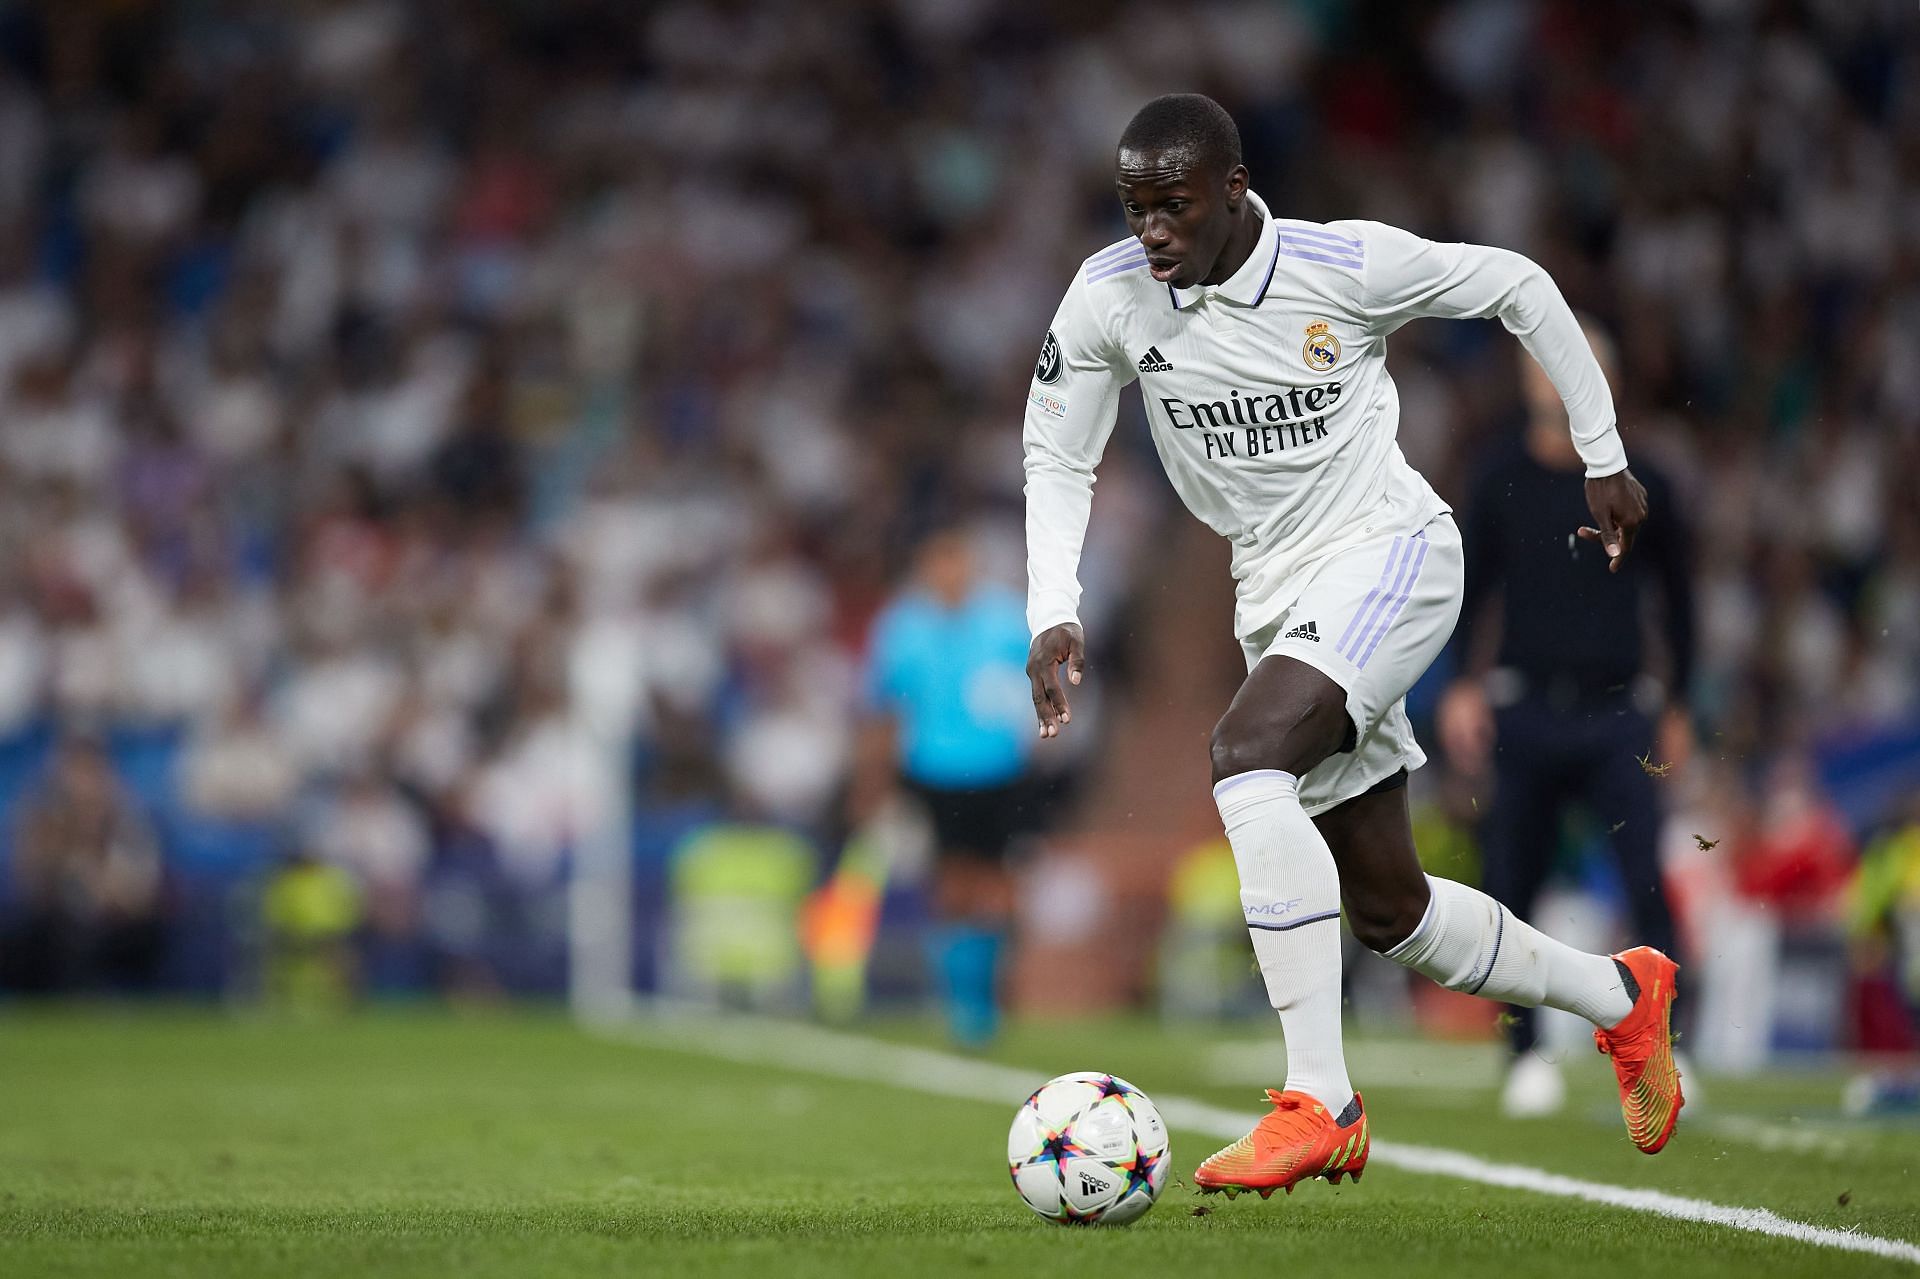 Ferland Mendy in action for Real Madrid